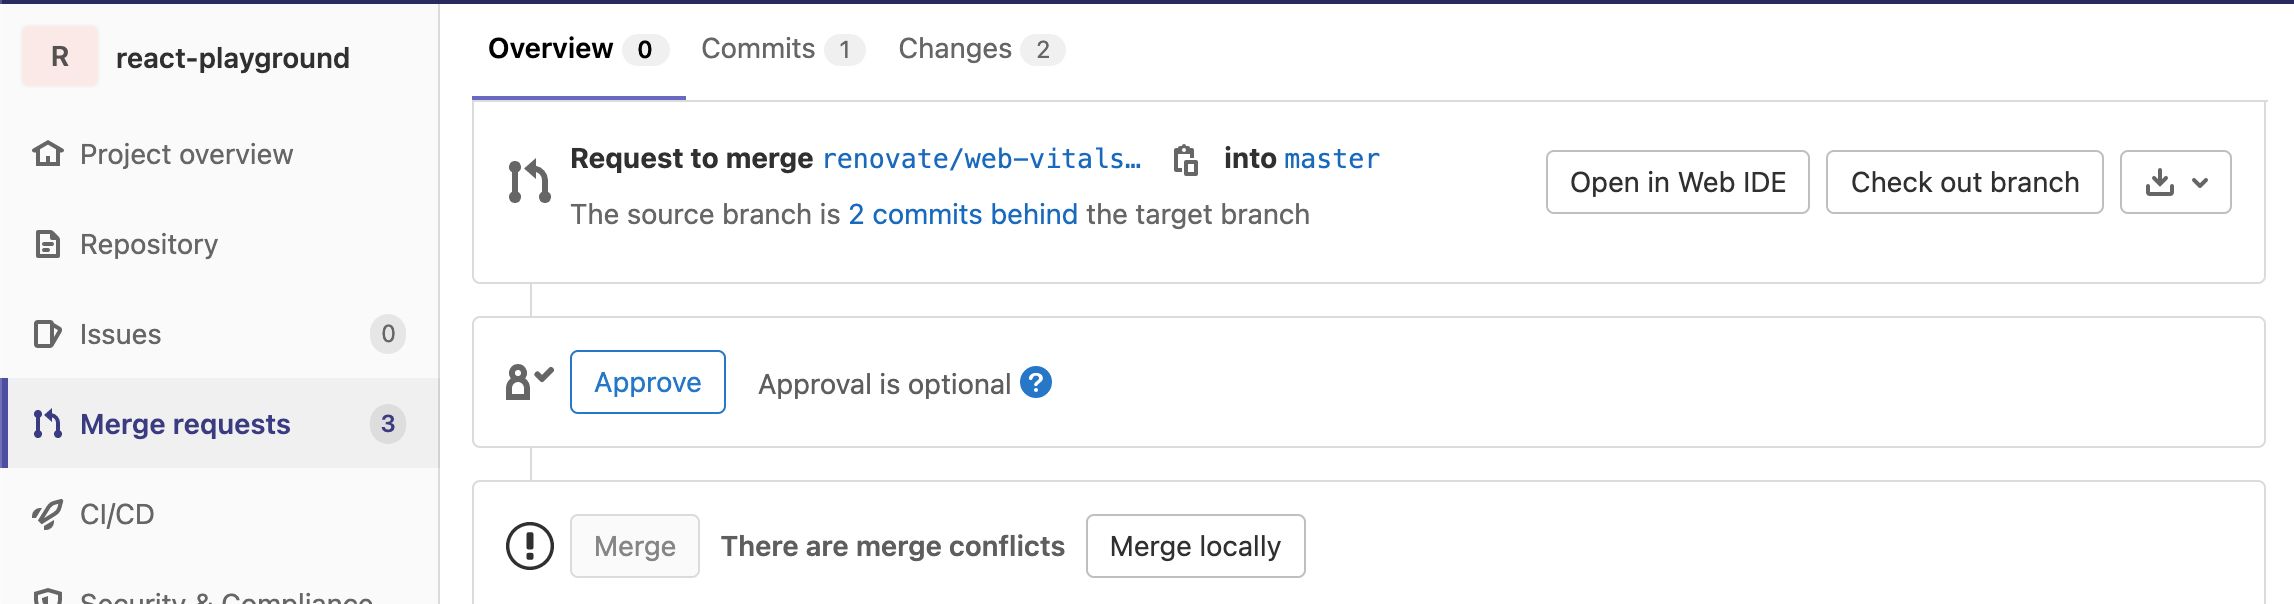 Merge conflict due to another MR that was previously merged.